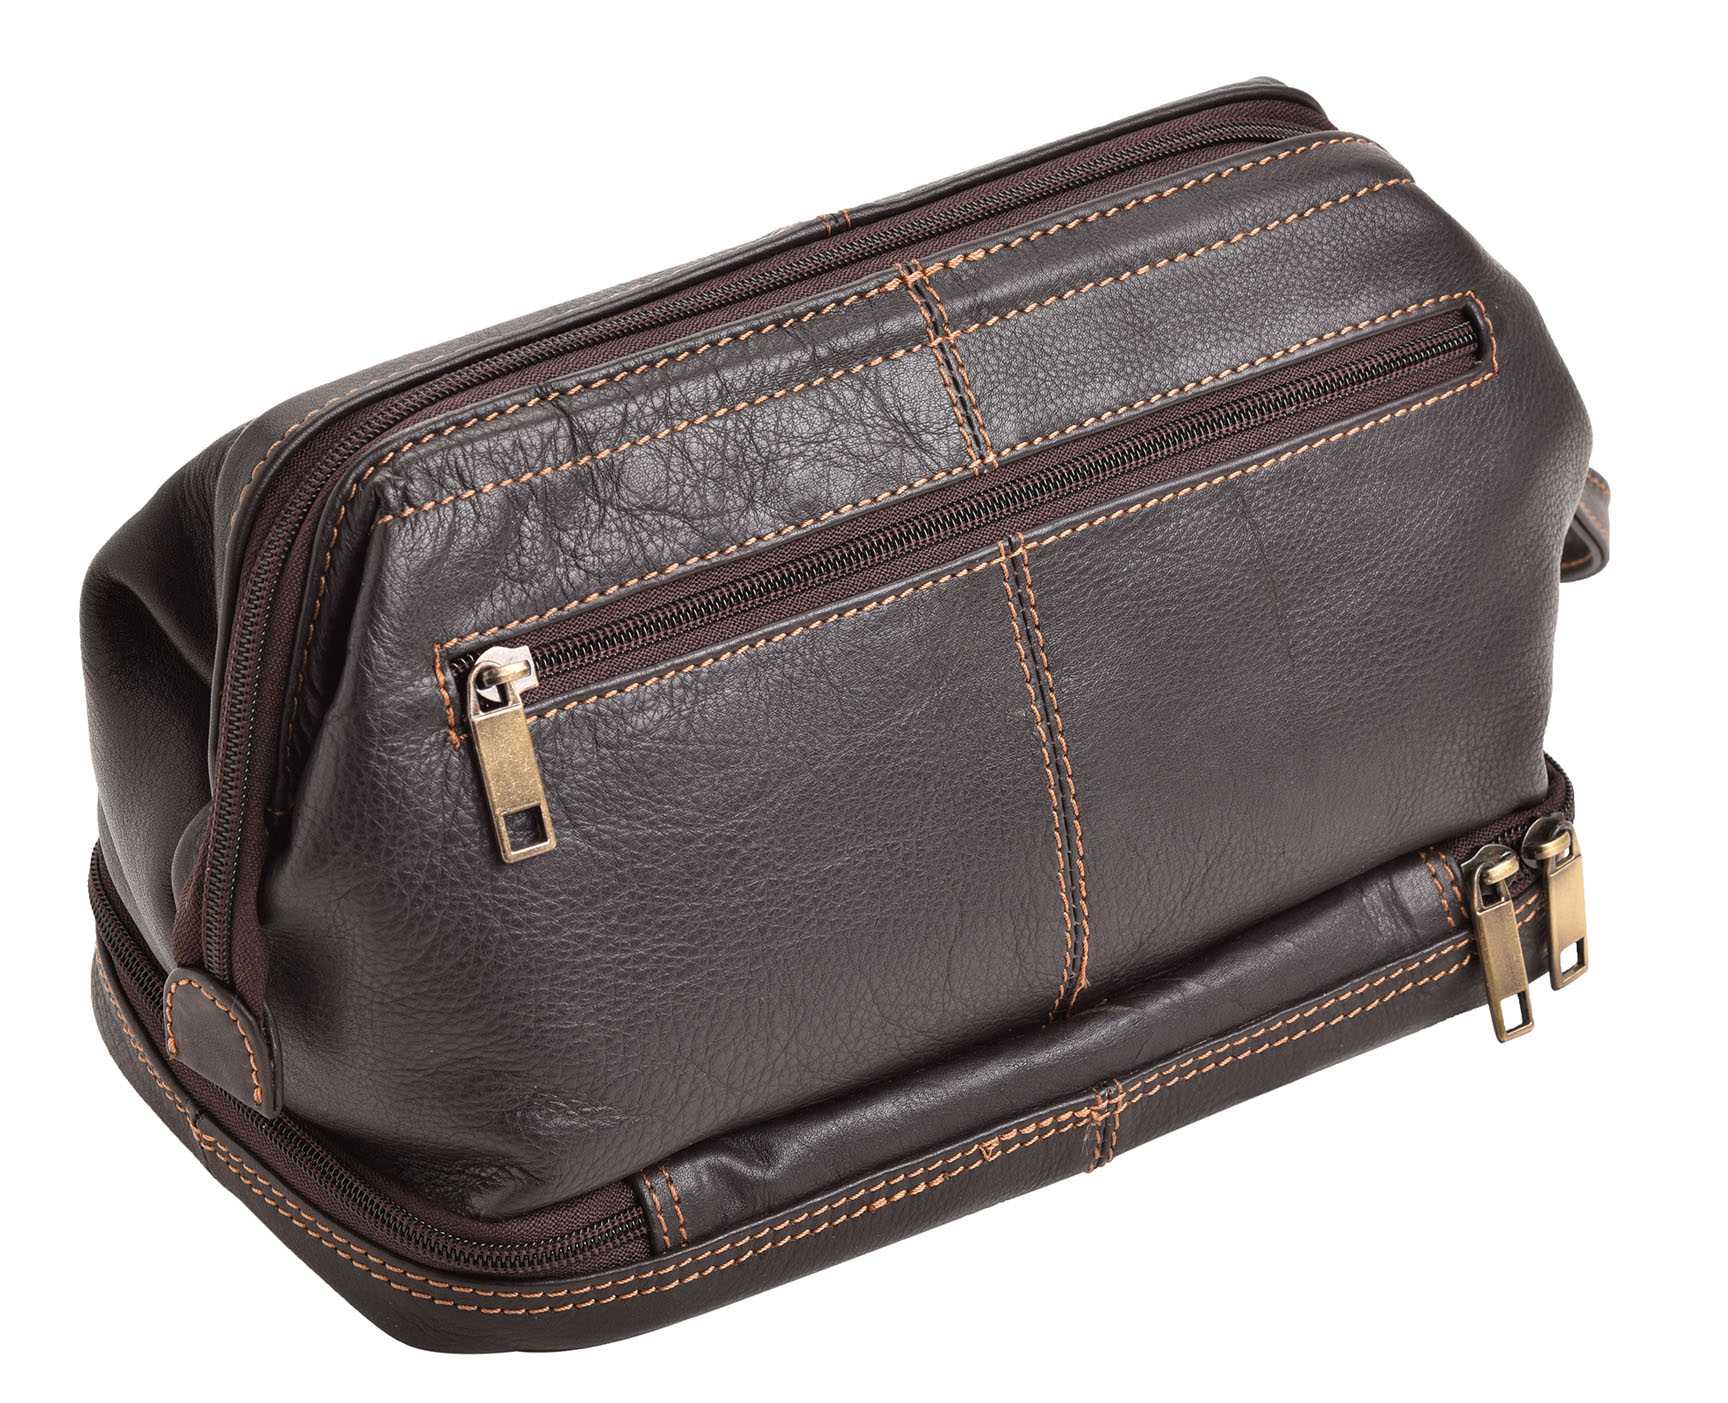 Mens Zipped Wide Opening Luxurious Quality Leather Wash Shaving Toiletry Bag | eBay